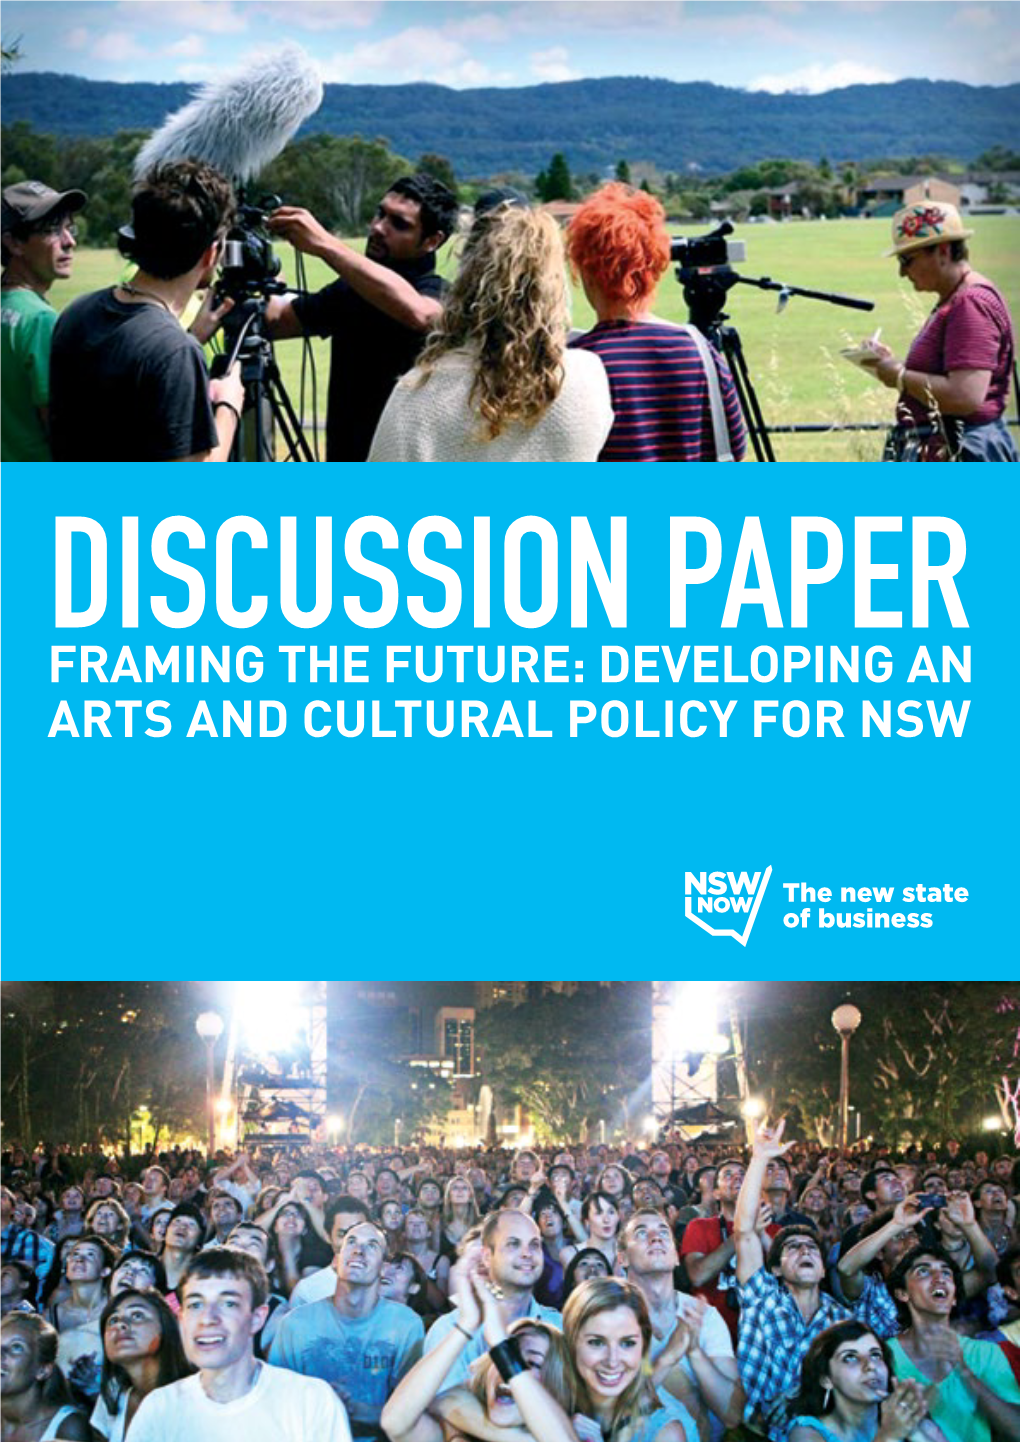 FRAMING the FUTURE: DEVELOPING an ARTS and CULTURAL POLICY for NSW Ii DISCUSSION PAPER FRAMING the FUTURE: DEVELOPING an ARTS and CULTURAL POLICY for NSW